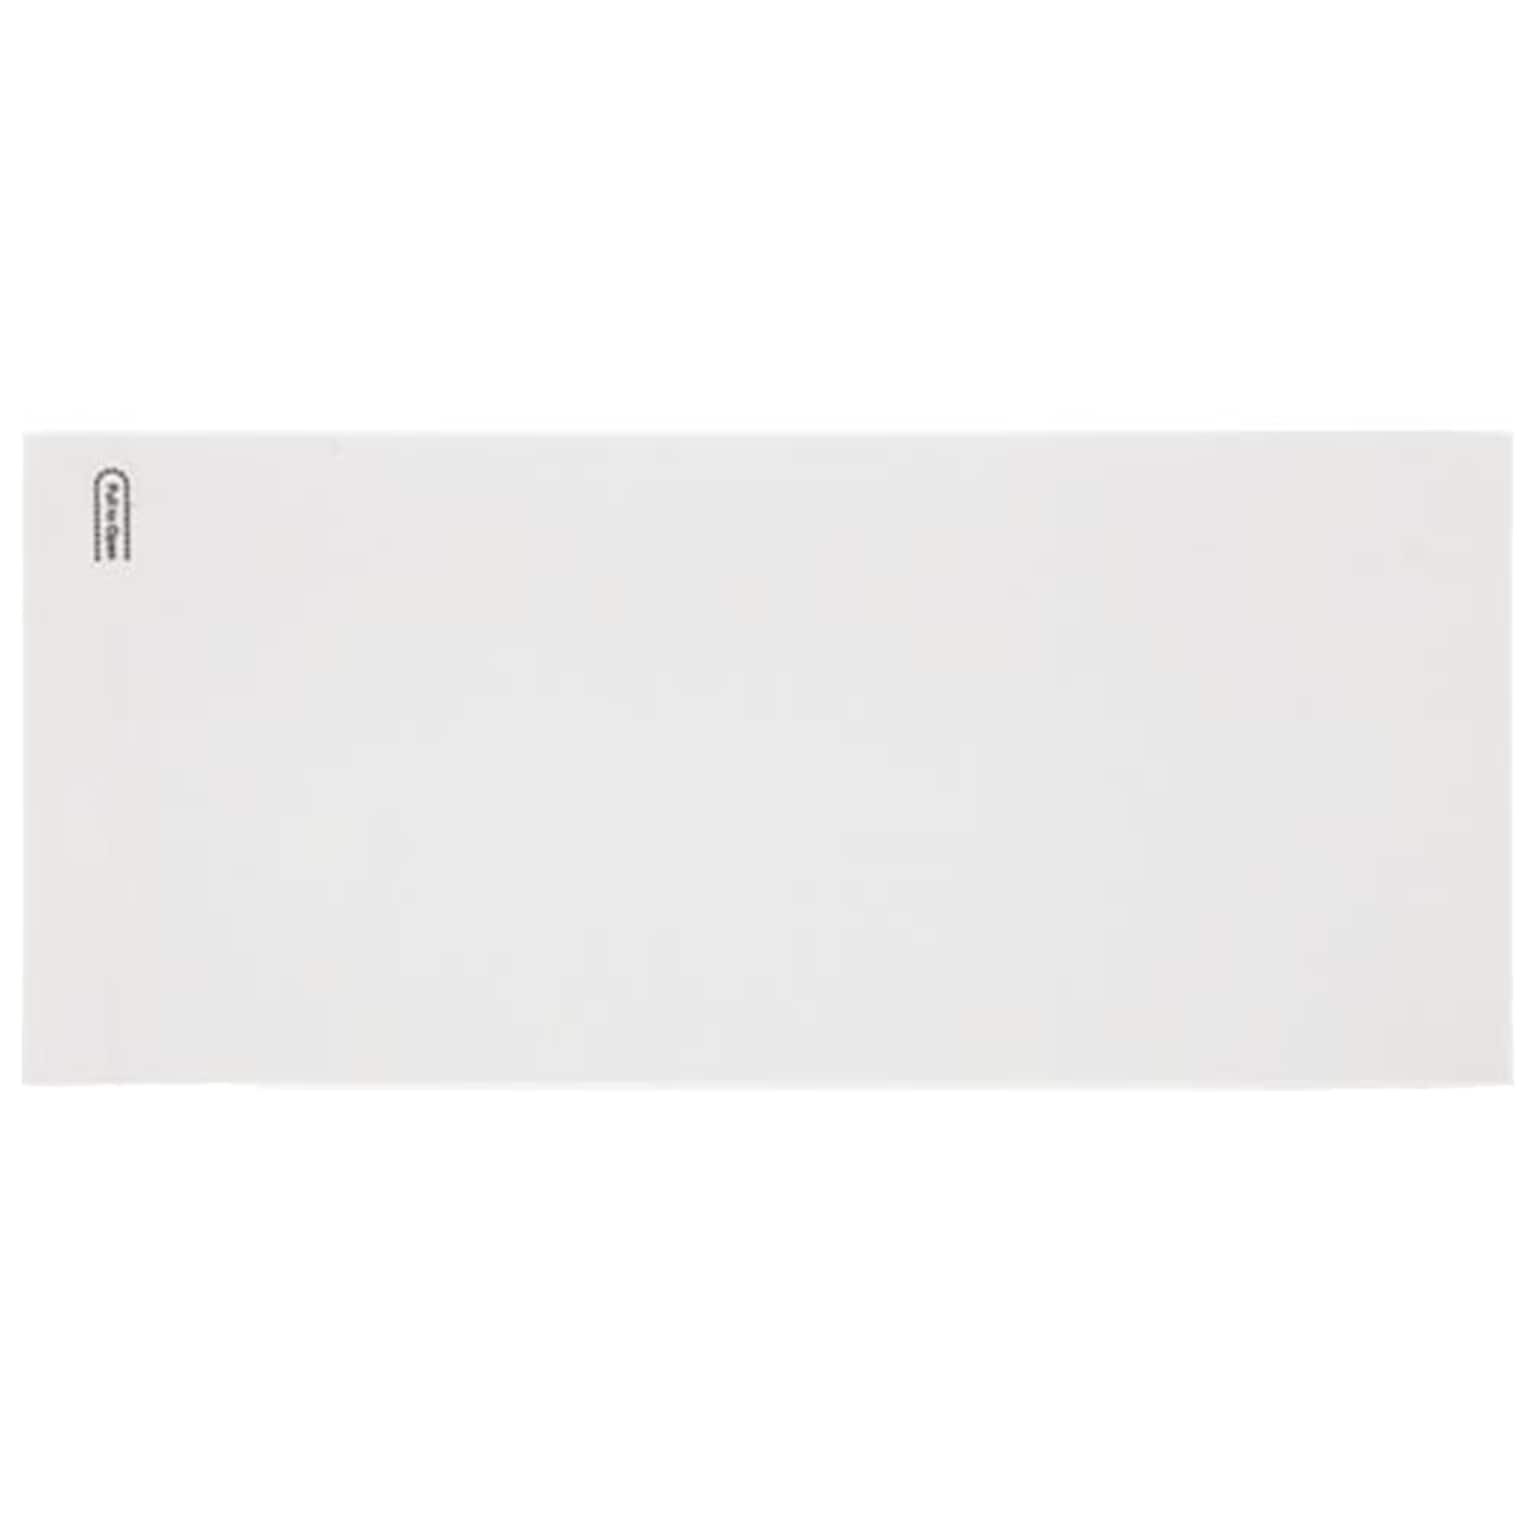 LUX #10 Business Envelope, 4 1/2 x 9 1/2, White, 1000/Pack (WS-2592-1M)